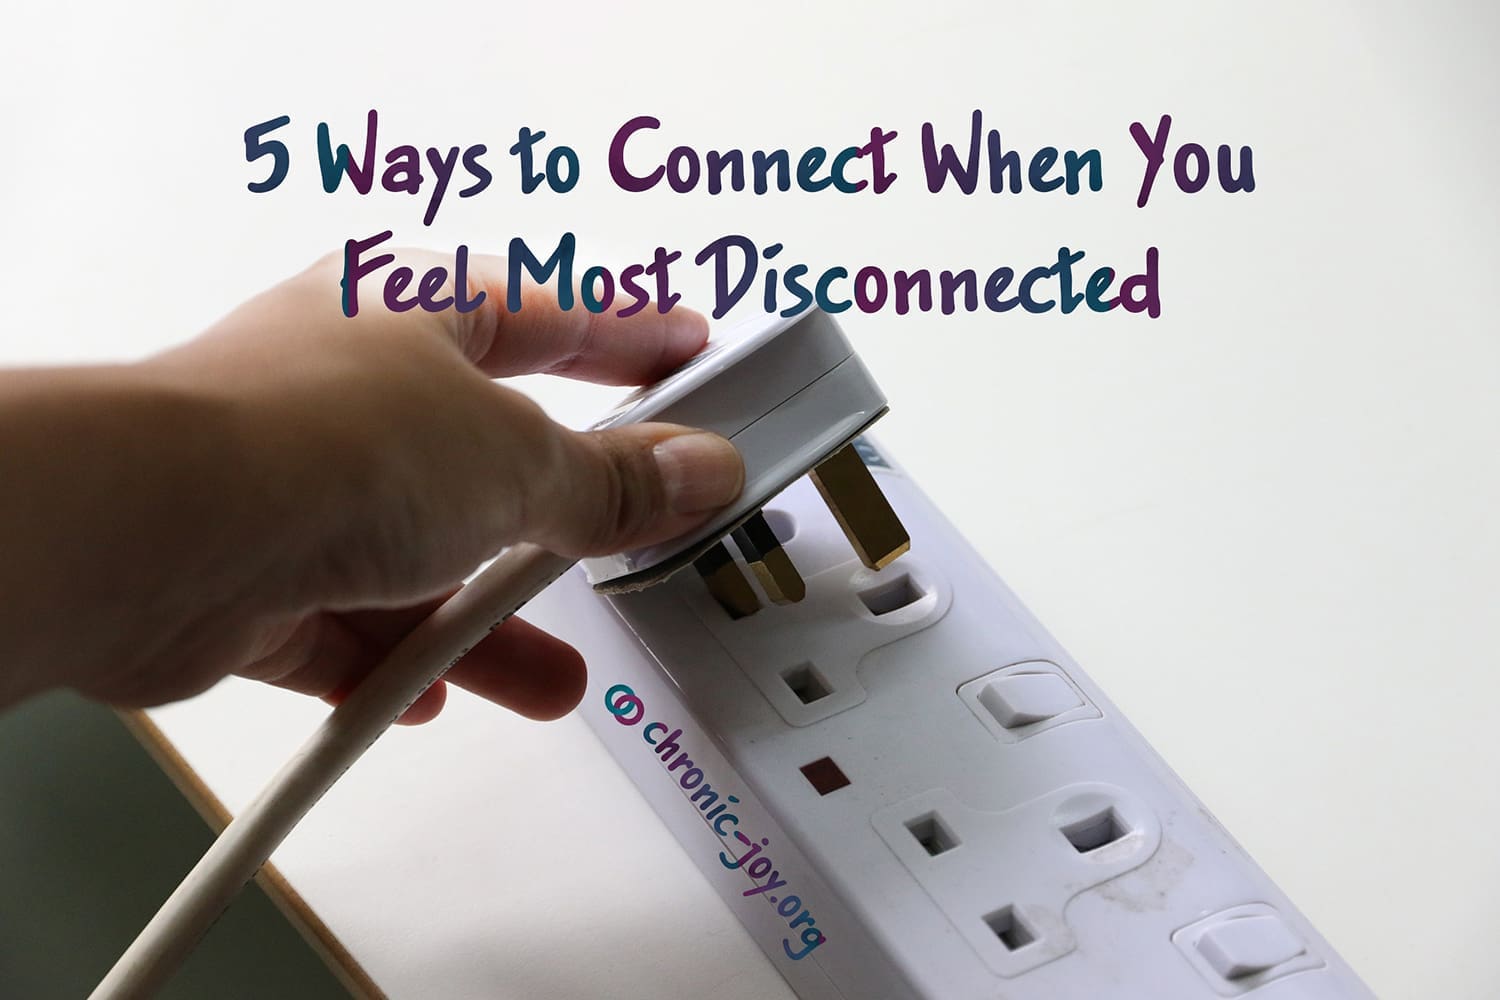 5 Ways to Connect When You Feel Most Disconnected